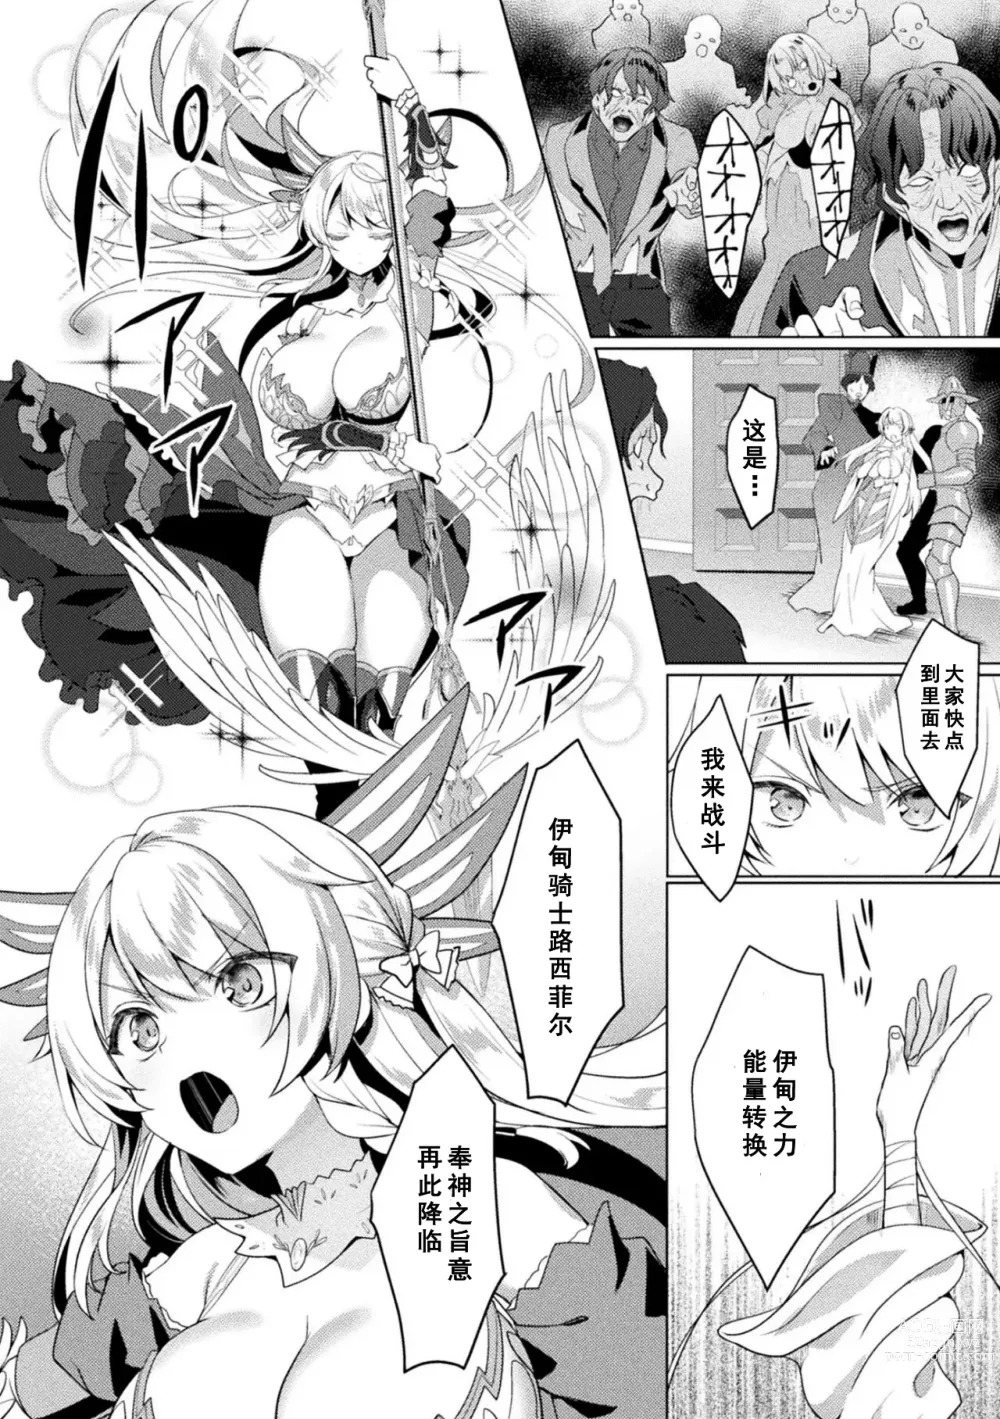 Page 10 of manga Edens Ritter Ch. 1 Gaiden - Innan no Mikohime Cecily Hen THE COMIC Ch. 1